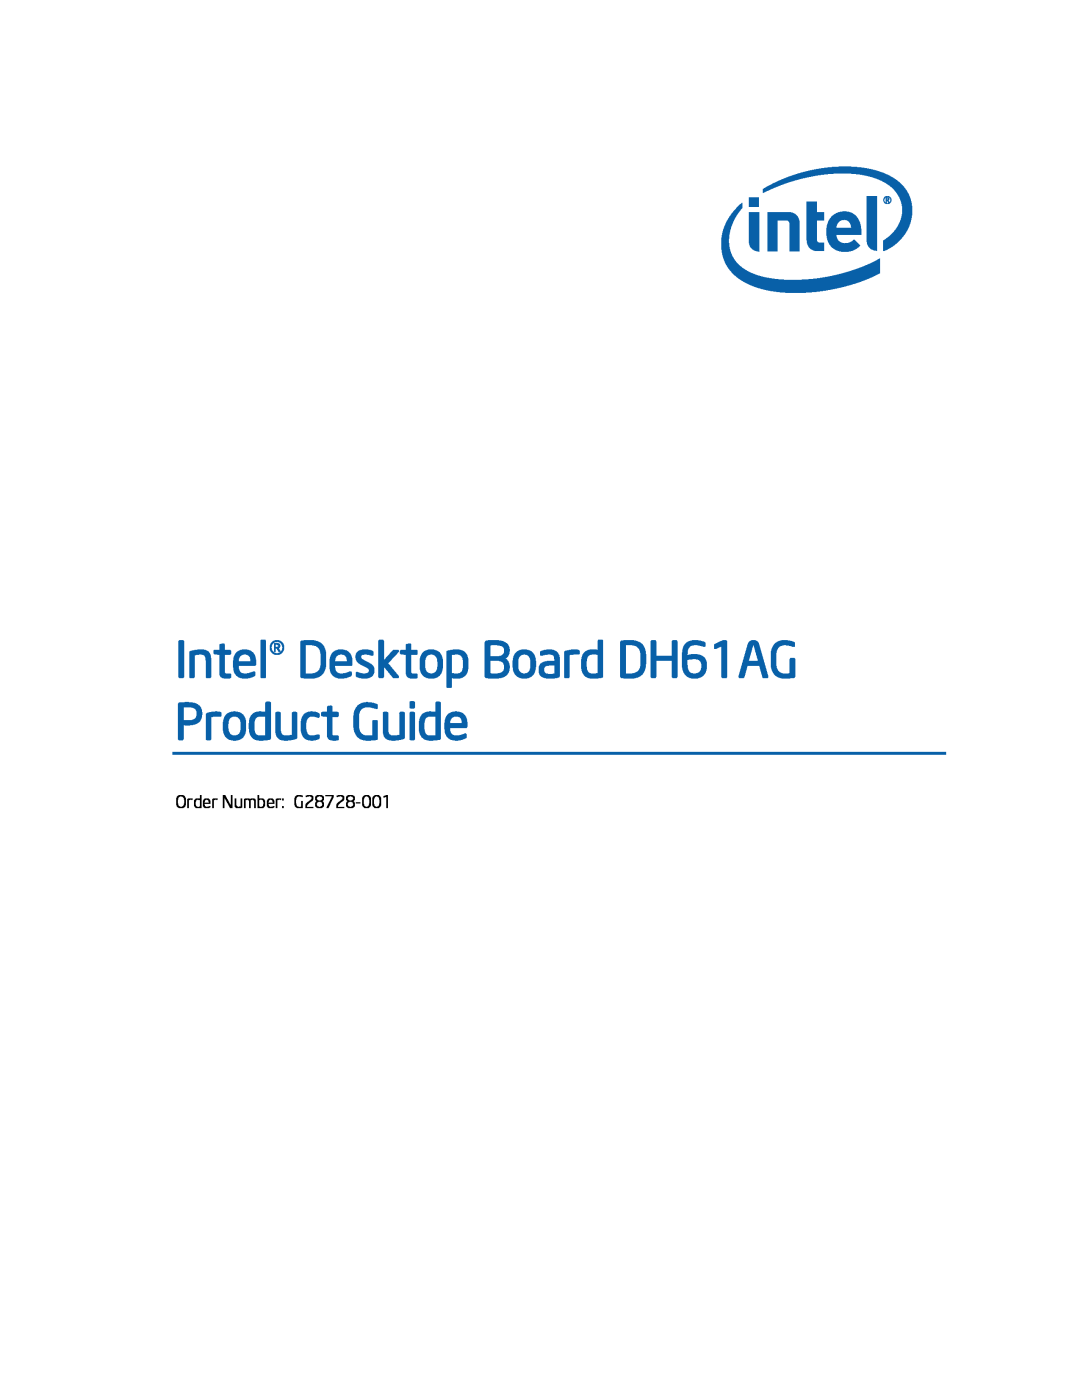 Intel BOXDH61AG manual Intel Desktop Board DH61AG Product Guide, Order Number G28728-001 